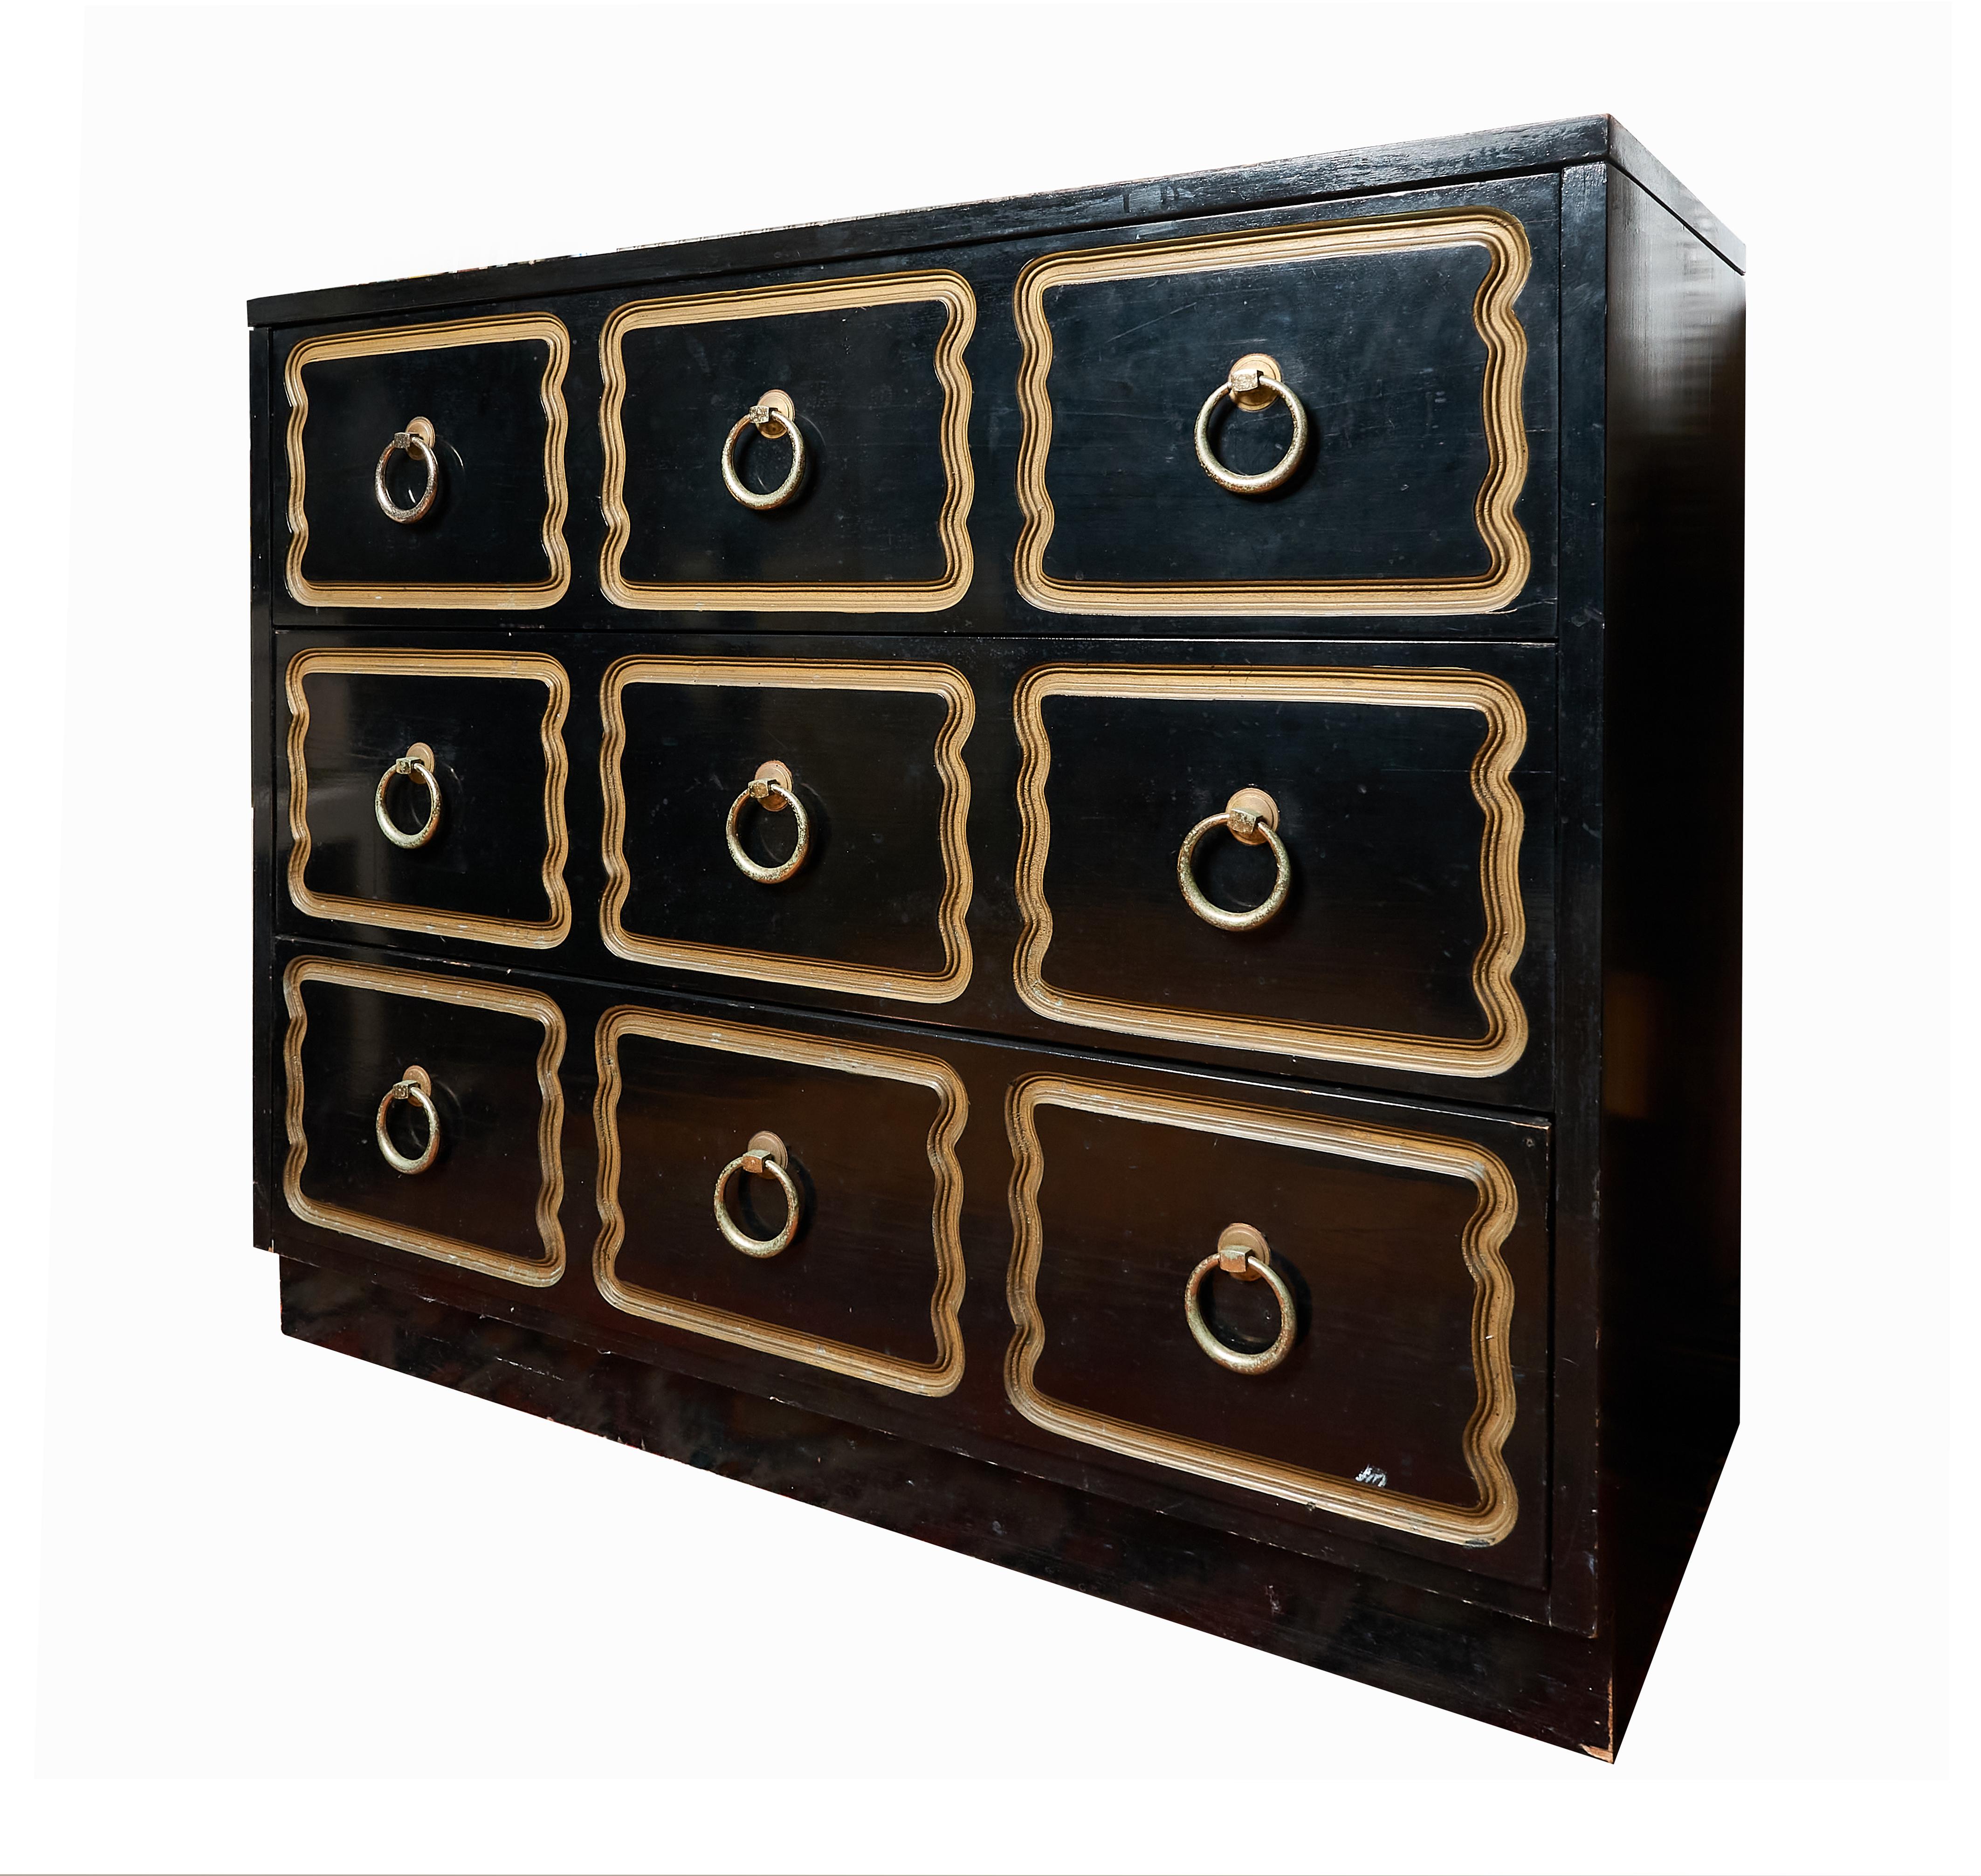 Nicely done reproduction of the iconic Dorothy Draper Espana dresser. Done in black satin painted finish with flat gold trim and brass tone large ring hardware. Some slight wear to the edges and hardware. Back is also painted black. There is no